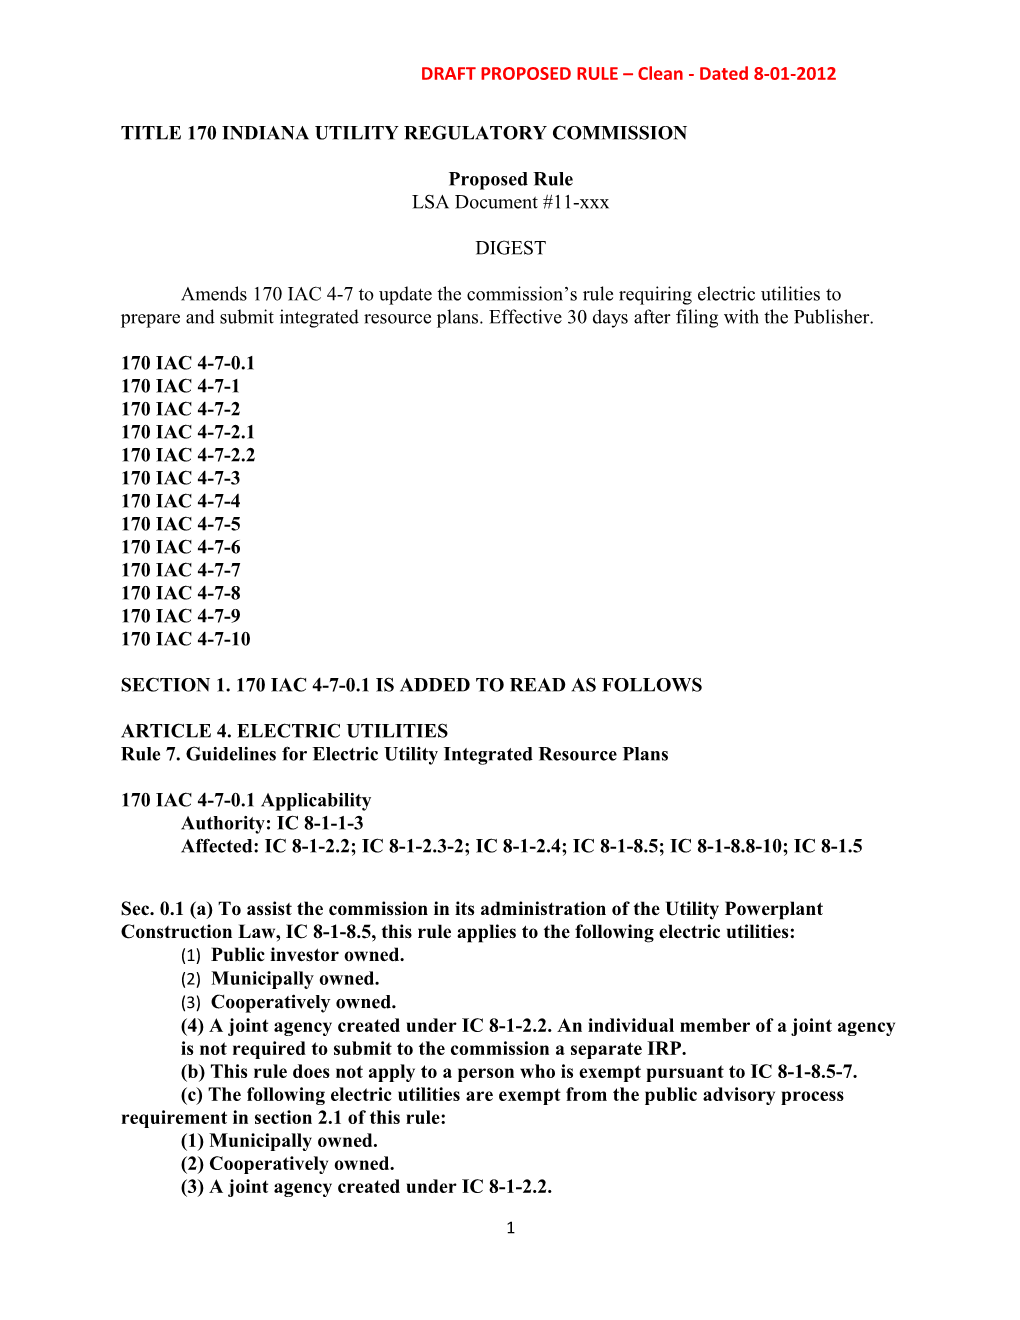 DRAFT PROPOSED RULE Clean - Dated 8-01-2012